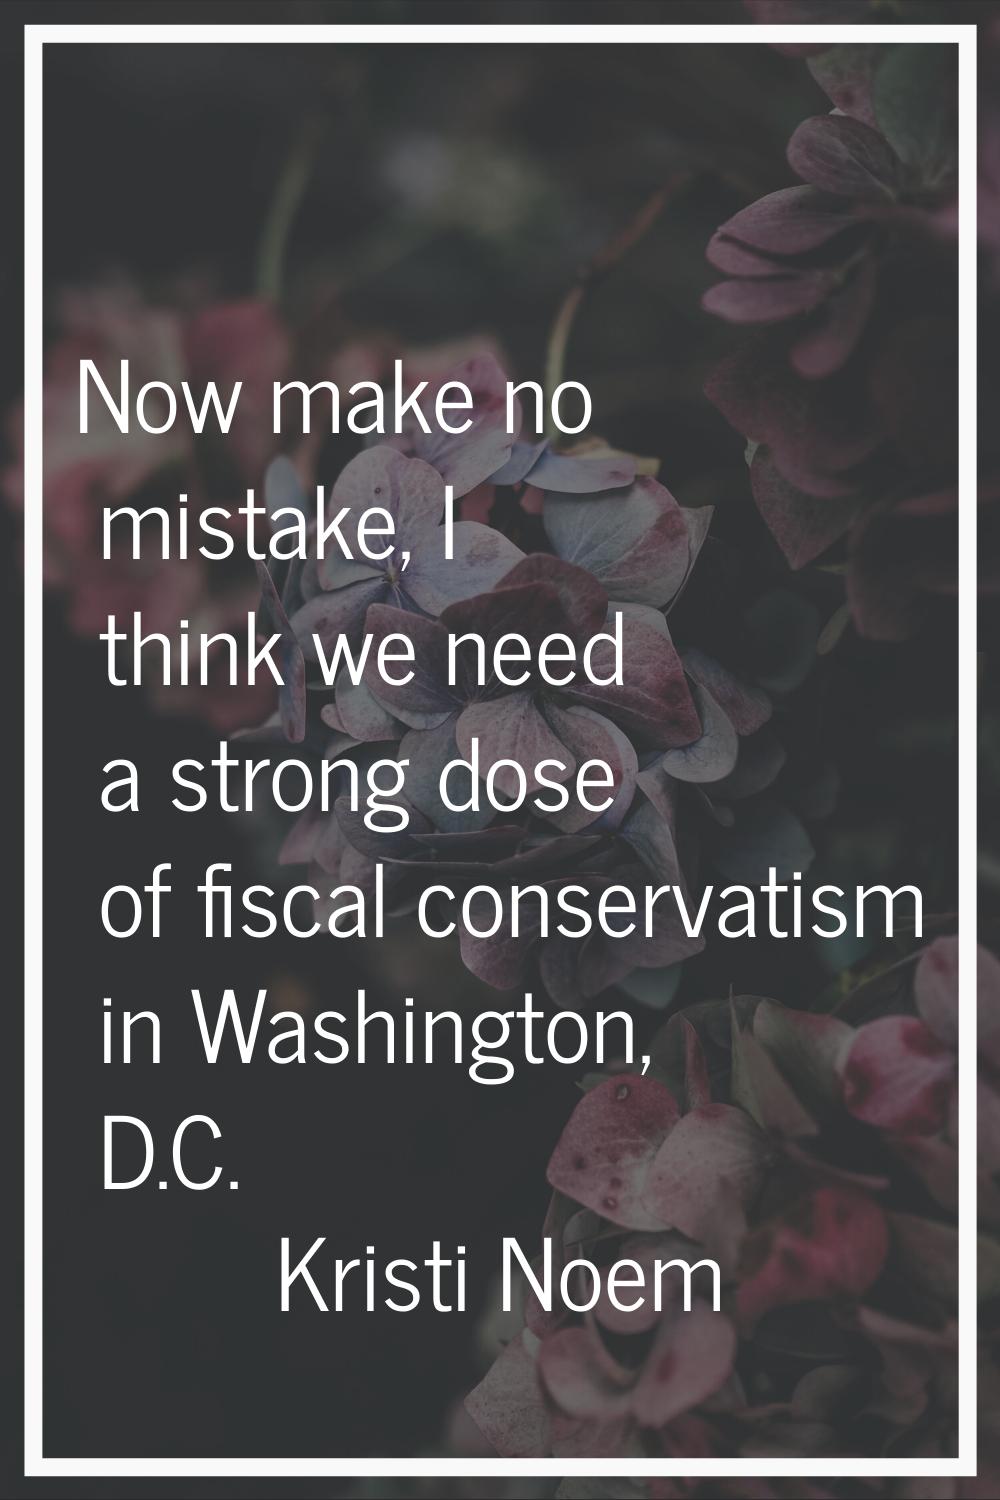 Now make no mistake, I think we need a strong dose of fiscal conservatism in Washington, D.C.